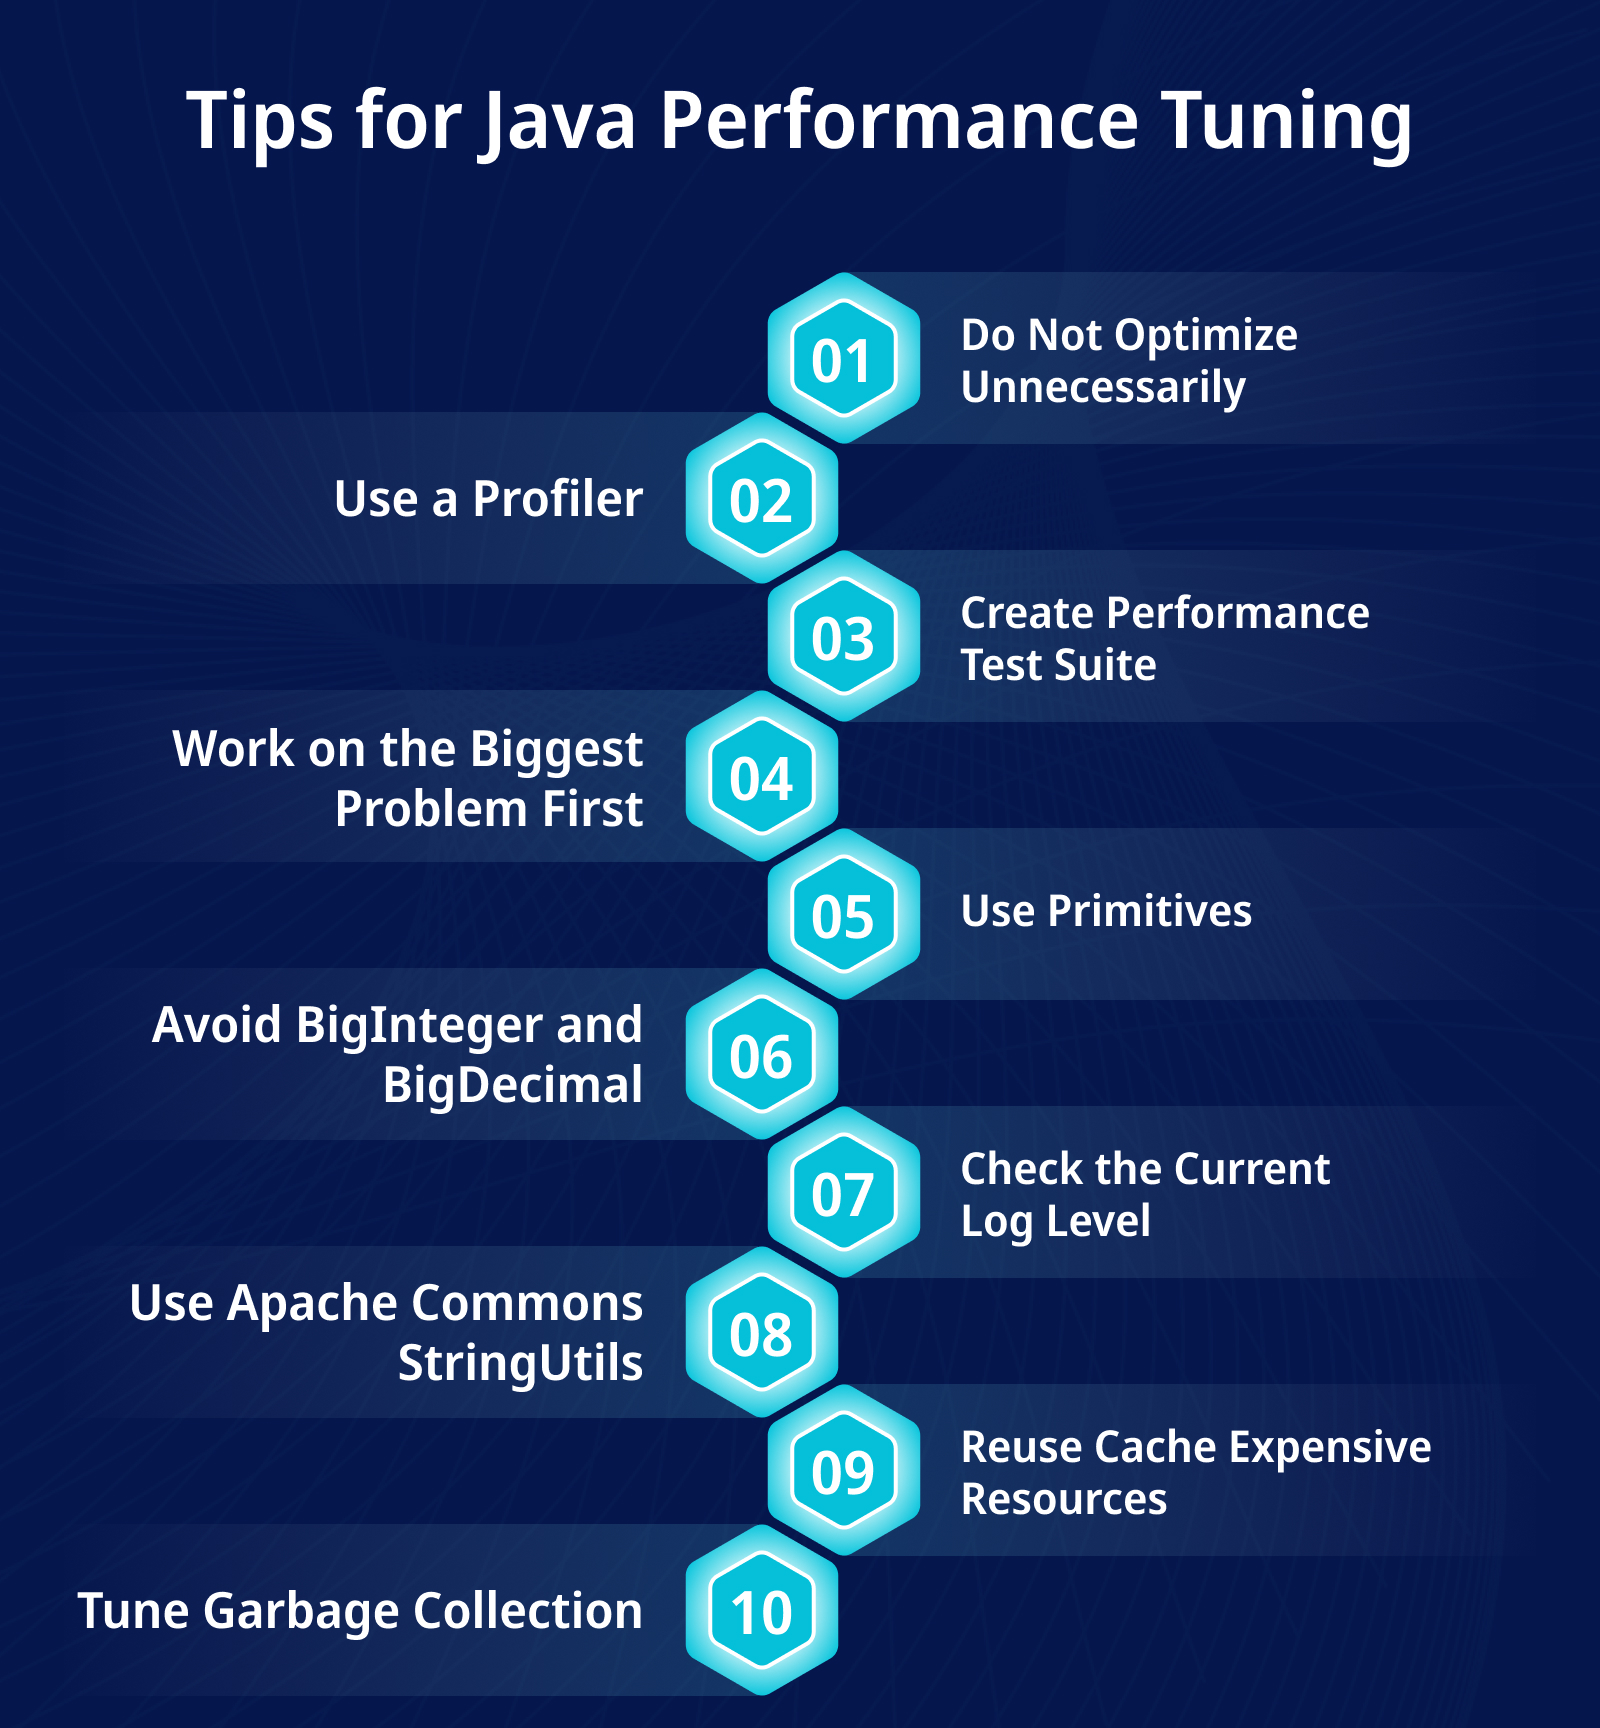 Tips for Java Performance Tuning